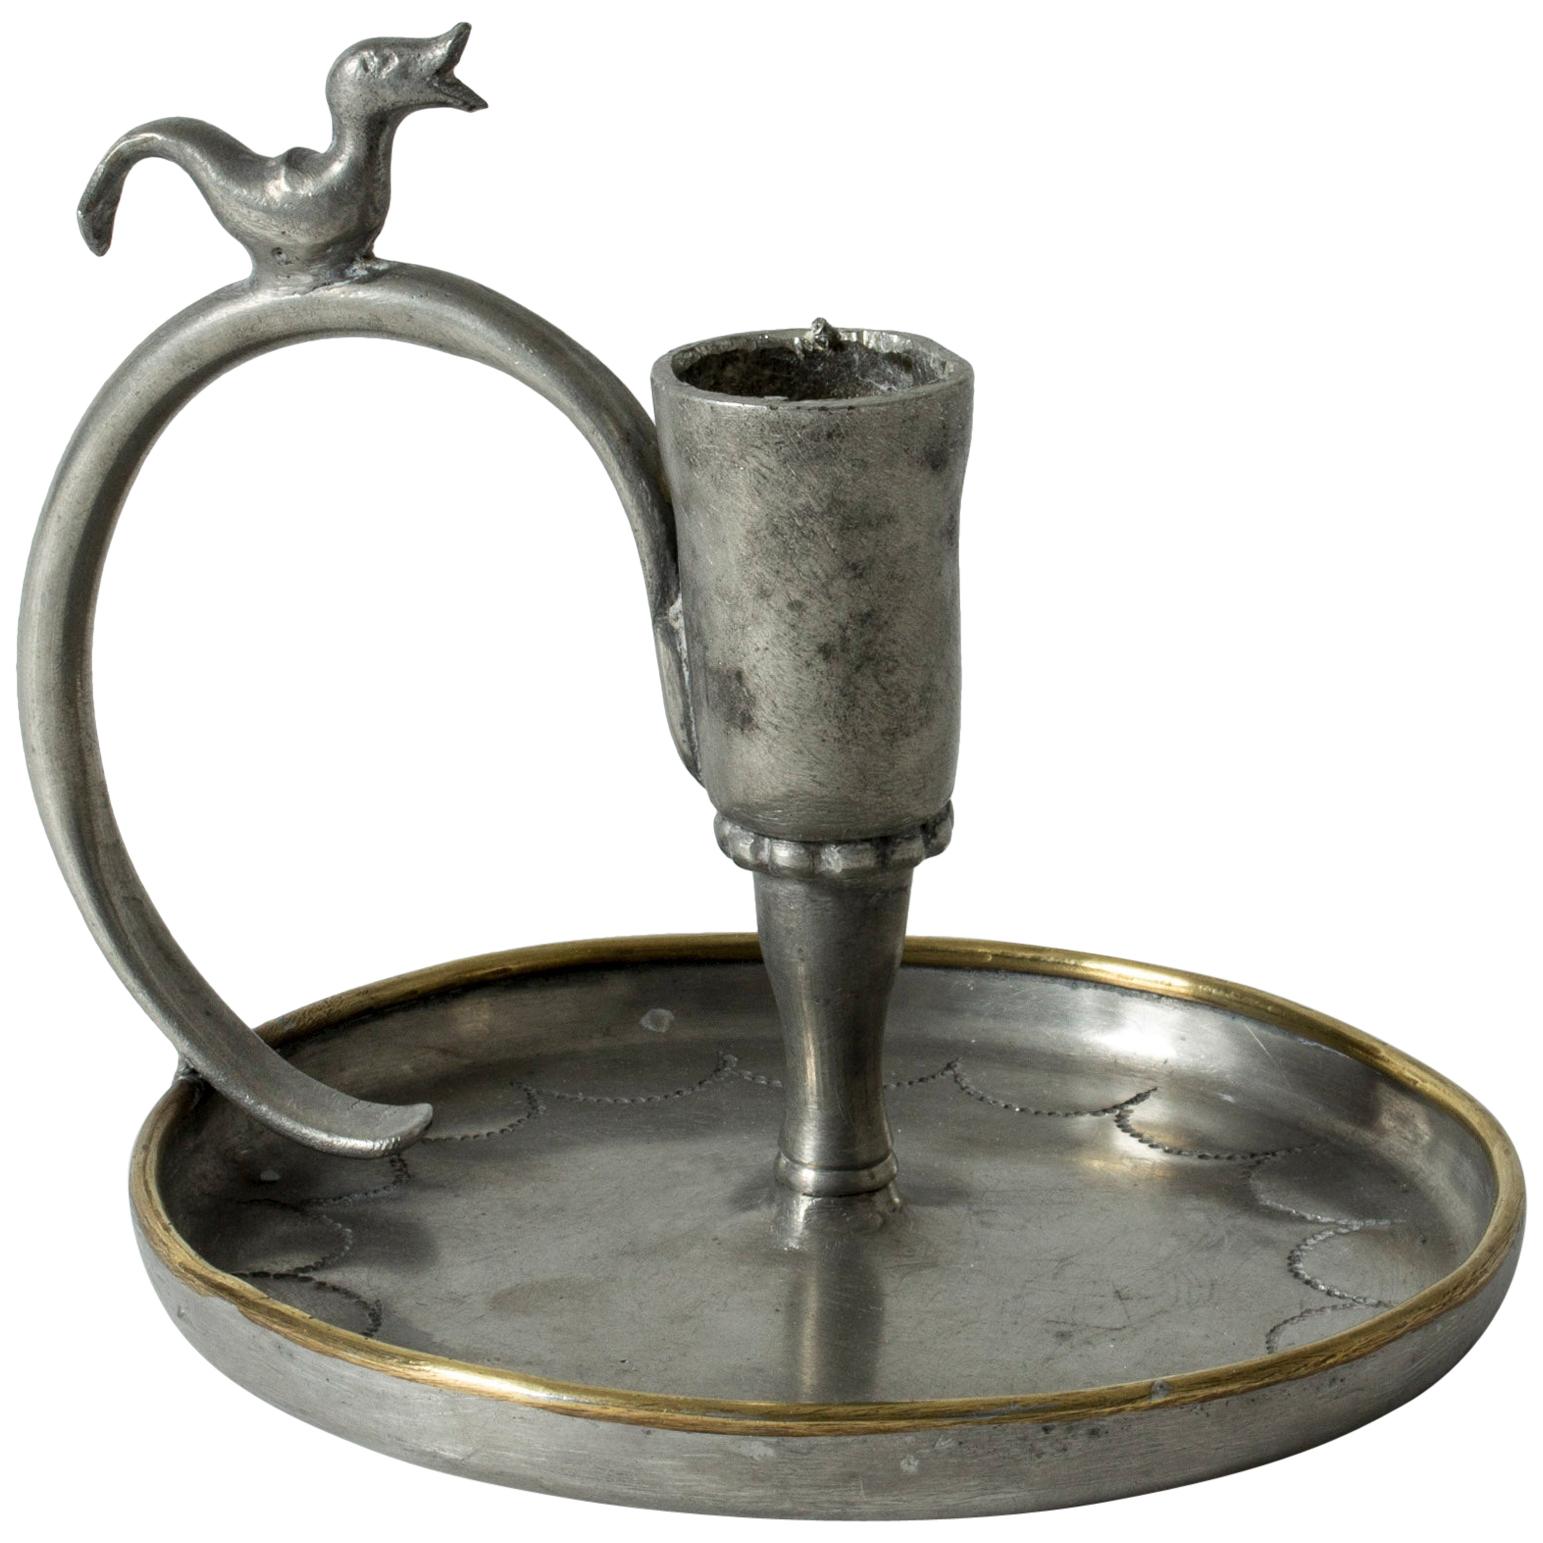 Handmade Pewter Candlestick by Nils Fougstedt